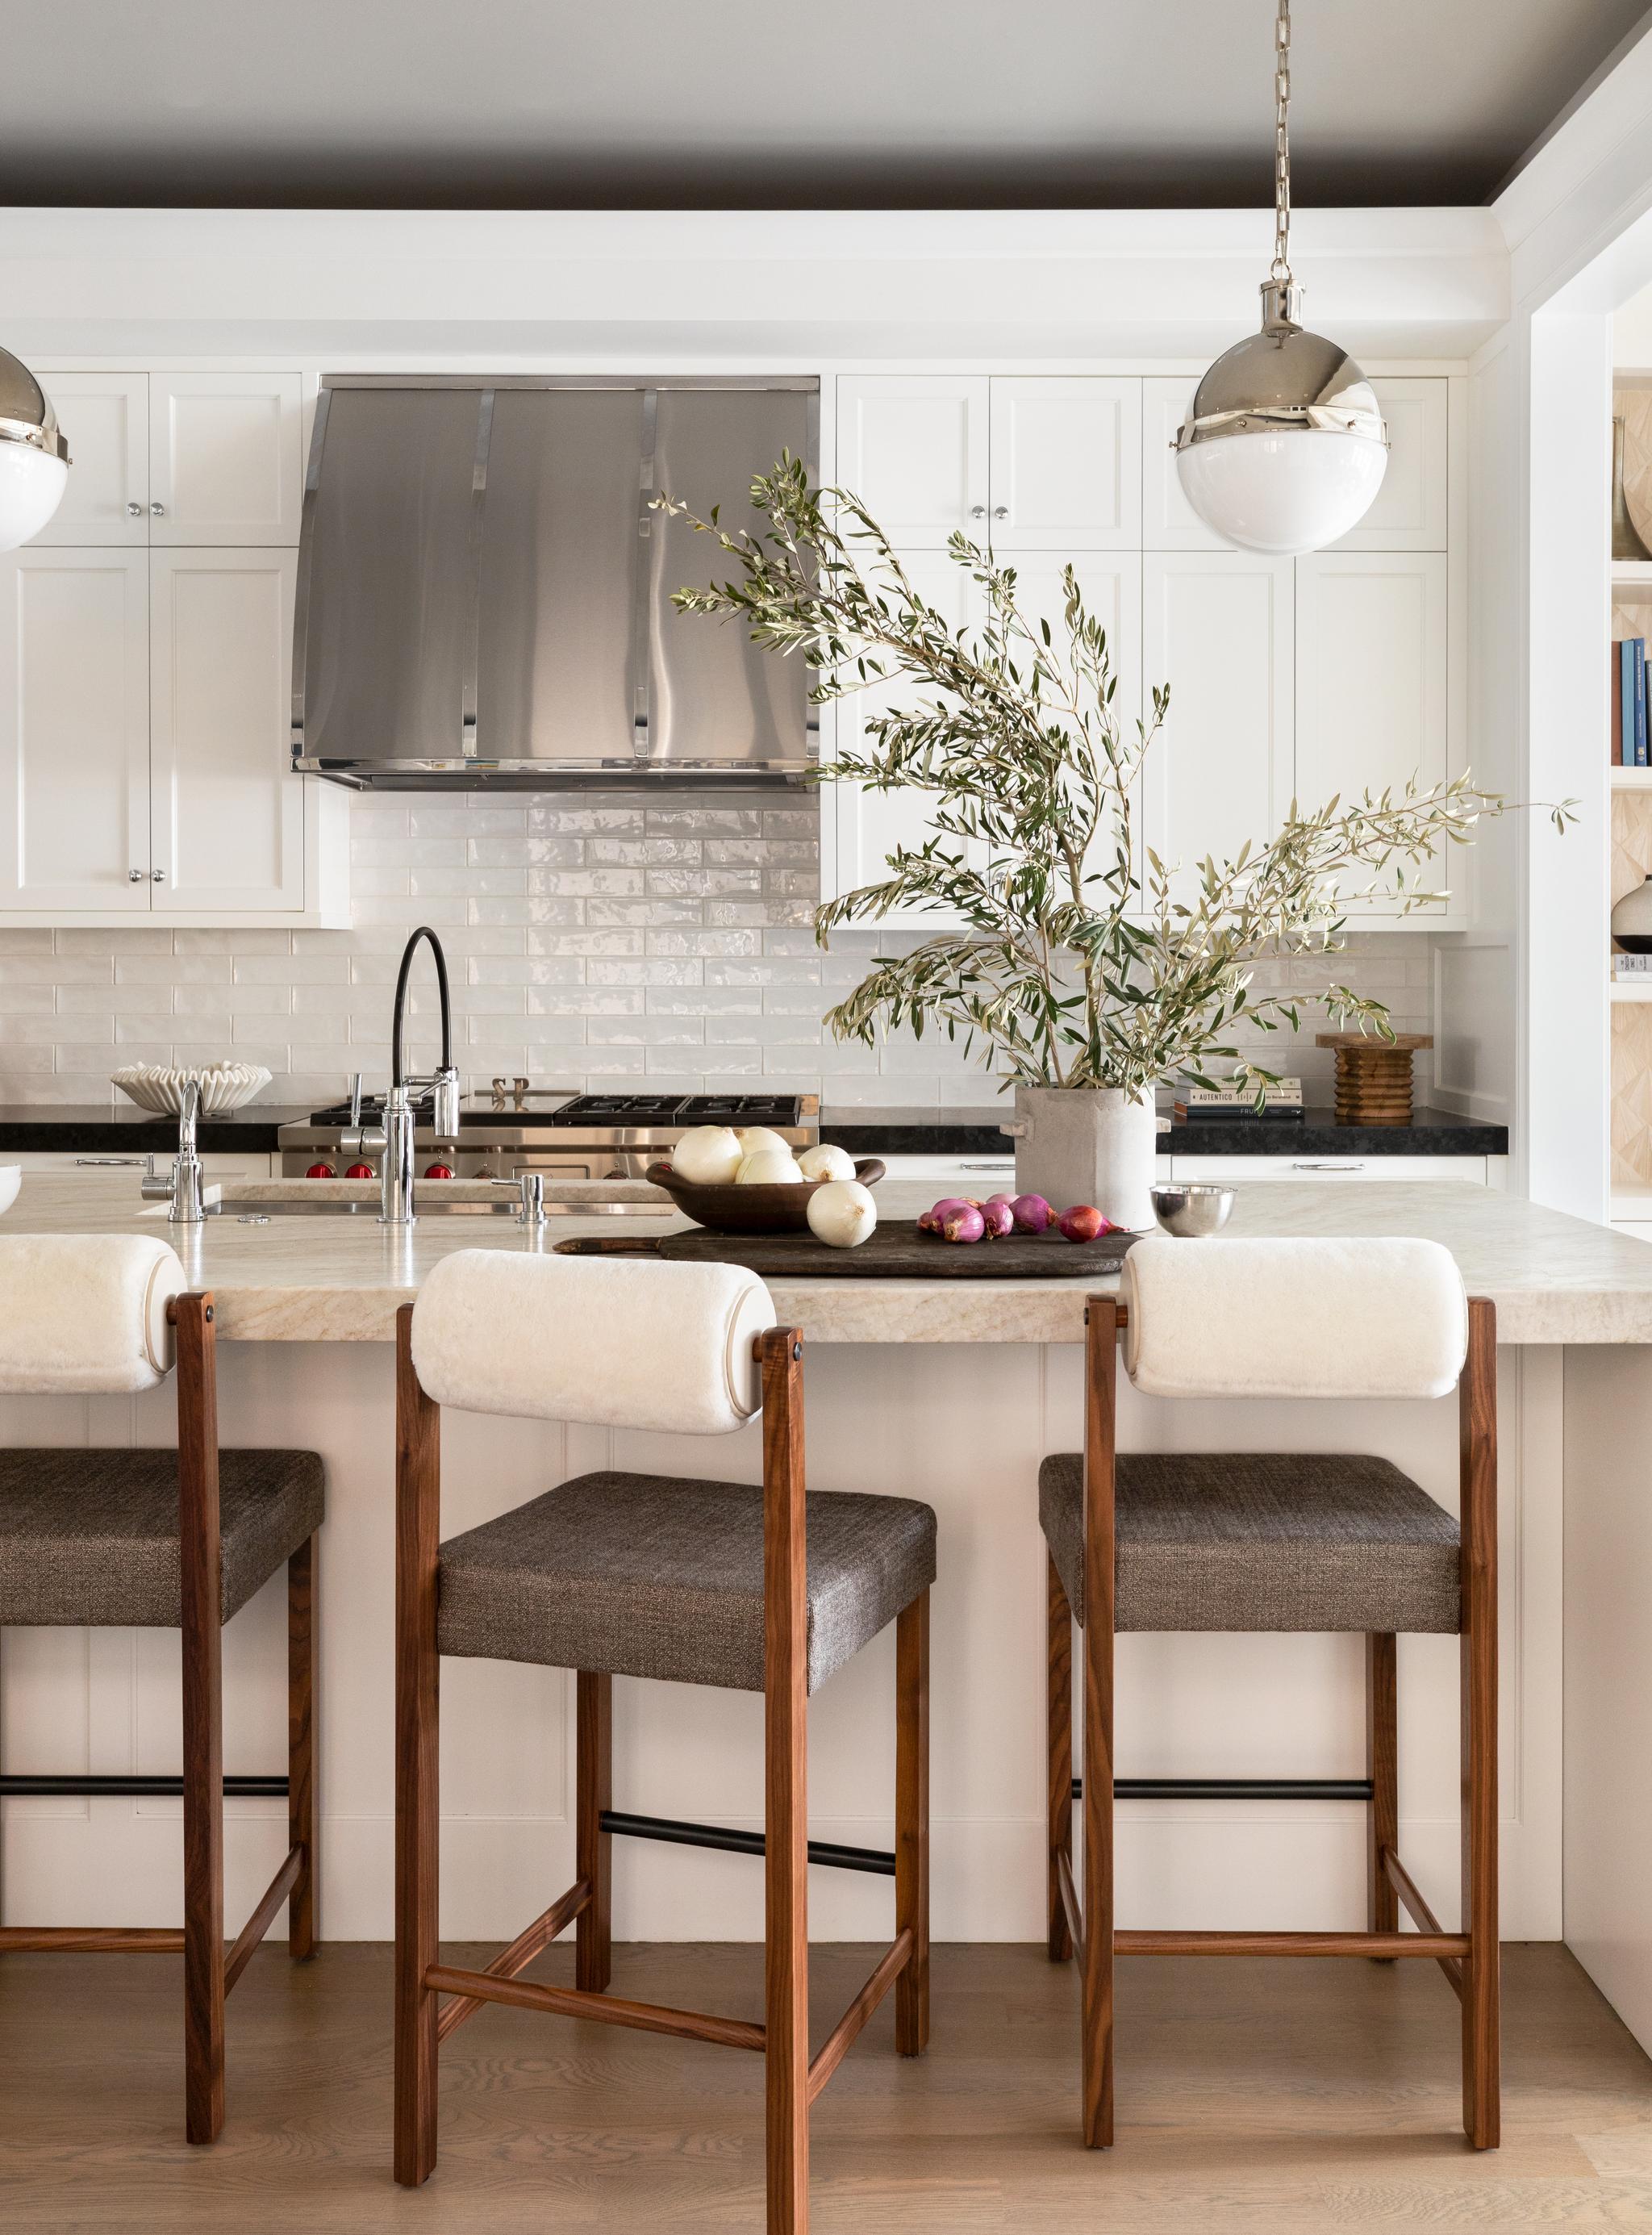 Kitchen - The heart of the home transformed with styling